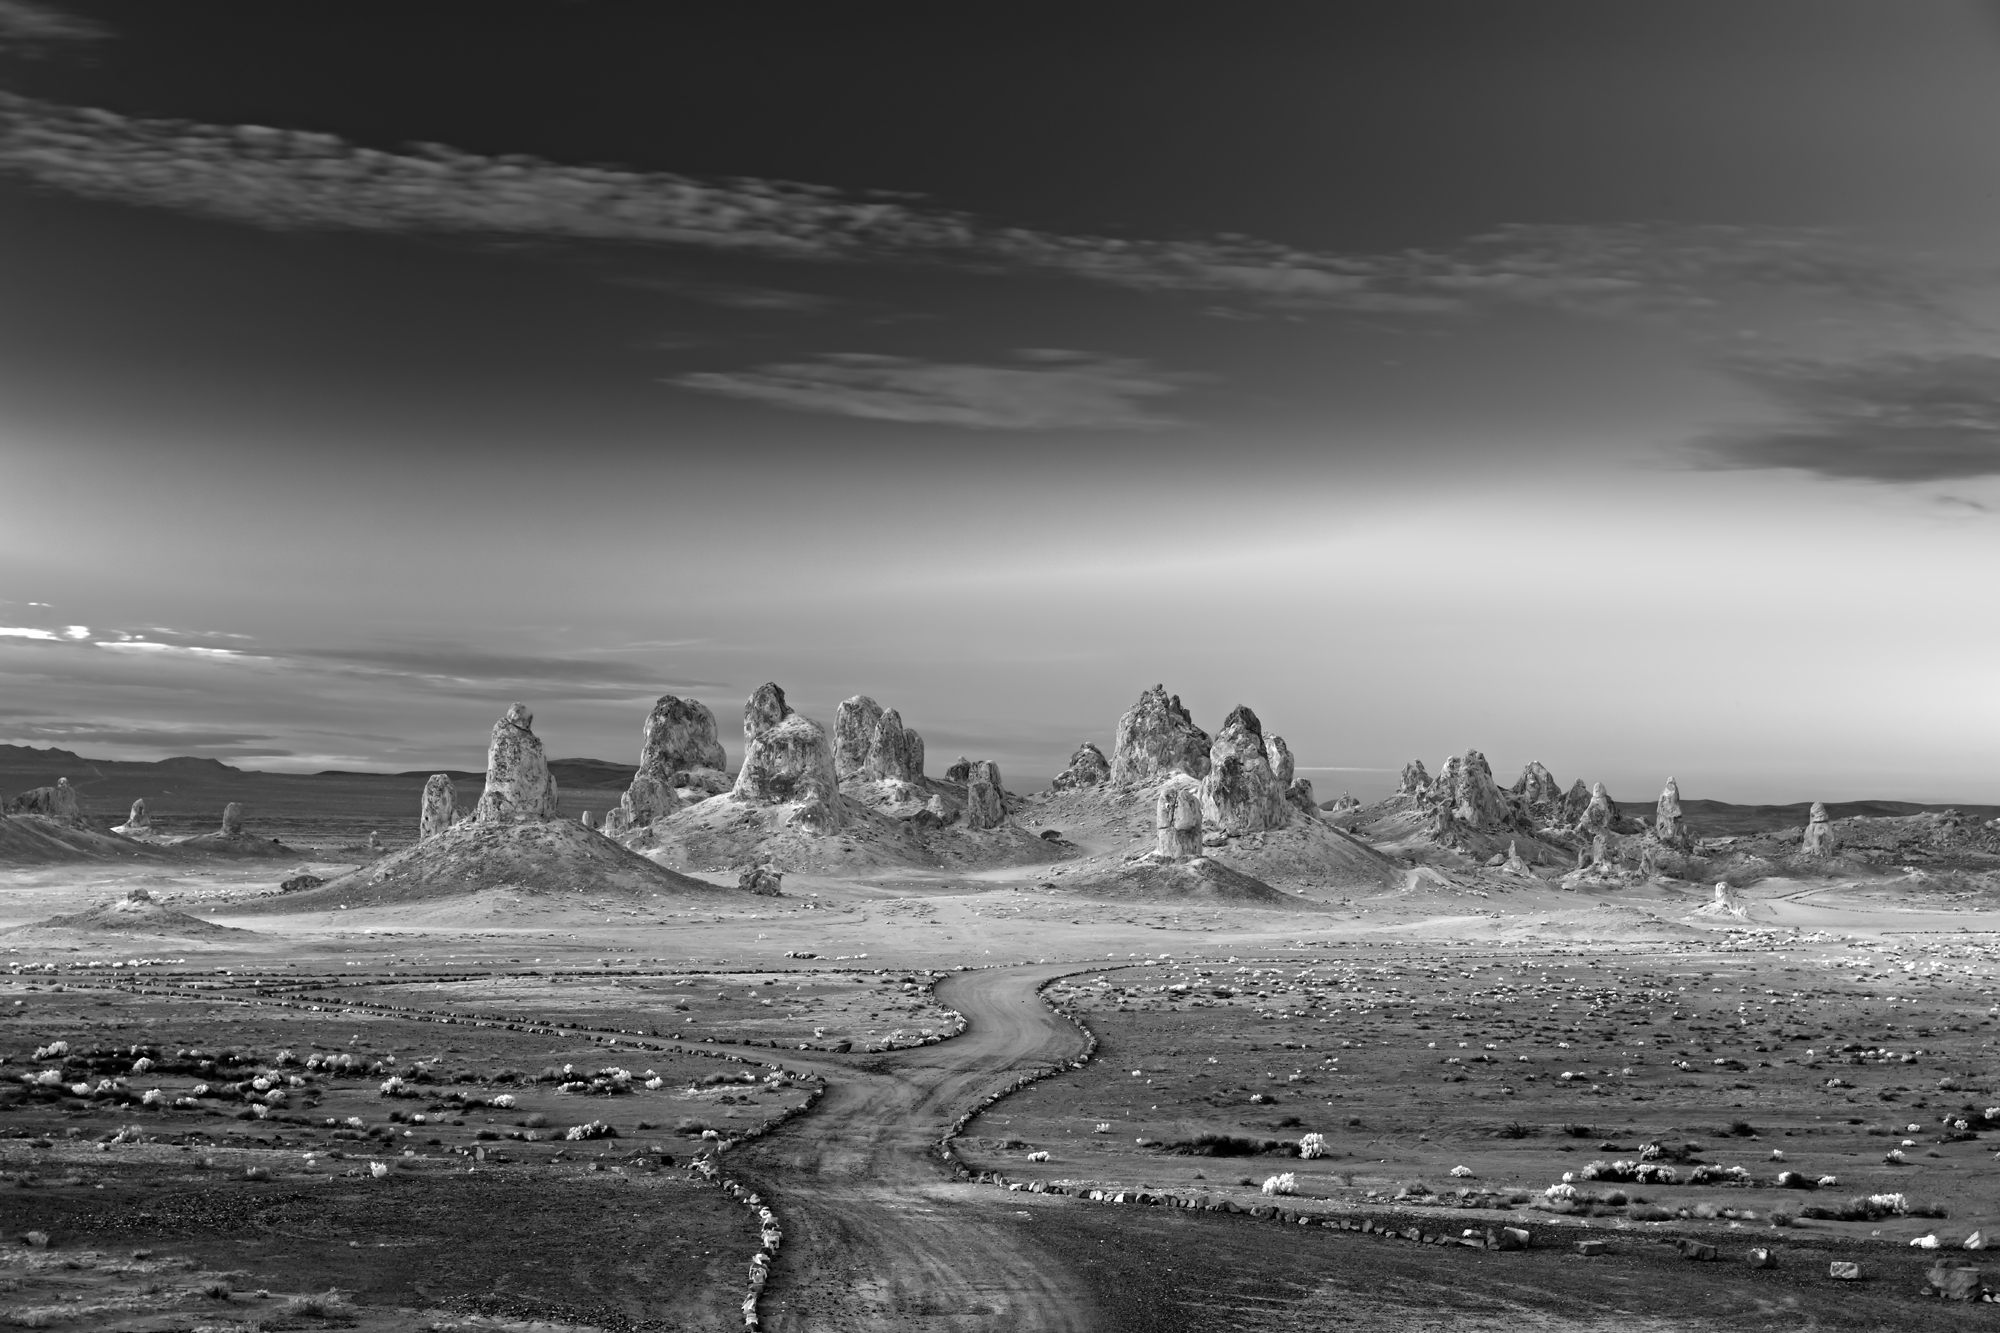  Natron Sunrise, Mitch Dobrowner, Catherine Couturier Gallery